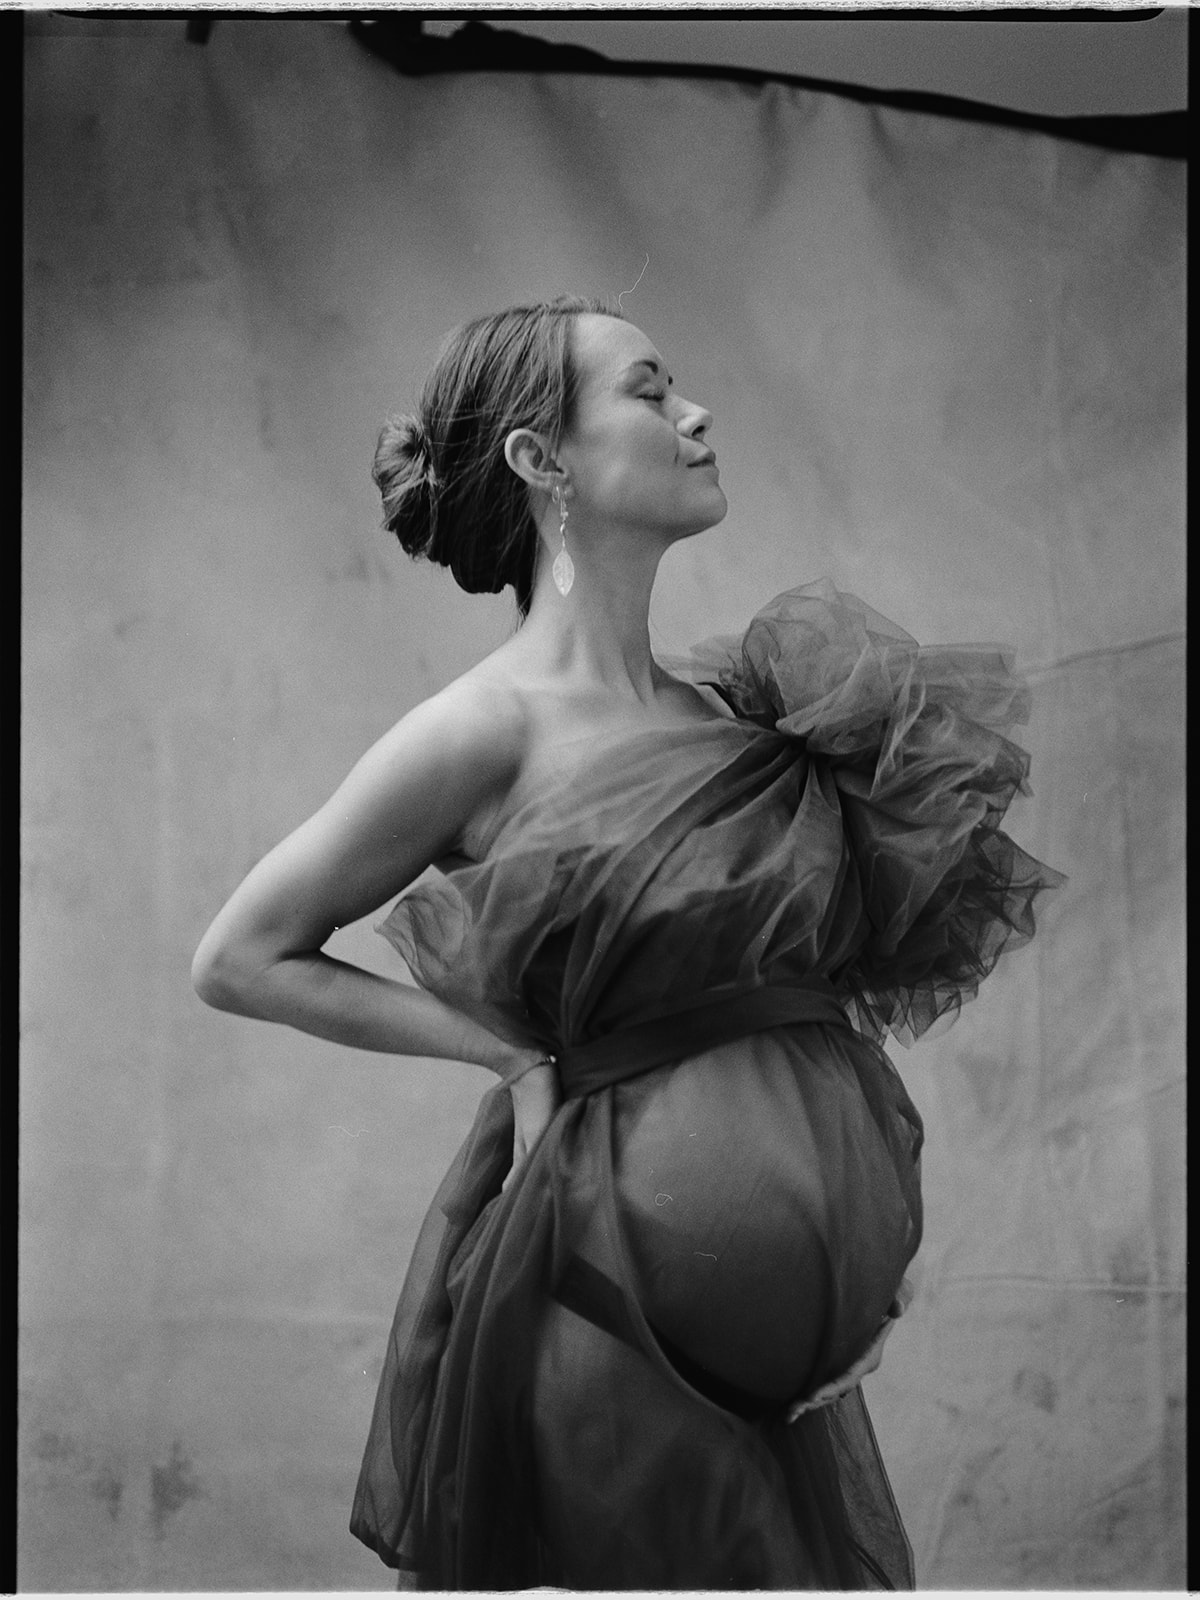 A pregnant woman leaning to the right with her hand on her waist in a black and white photo.